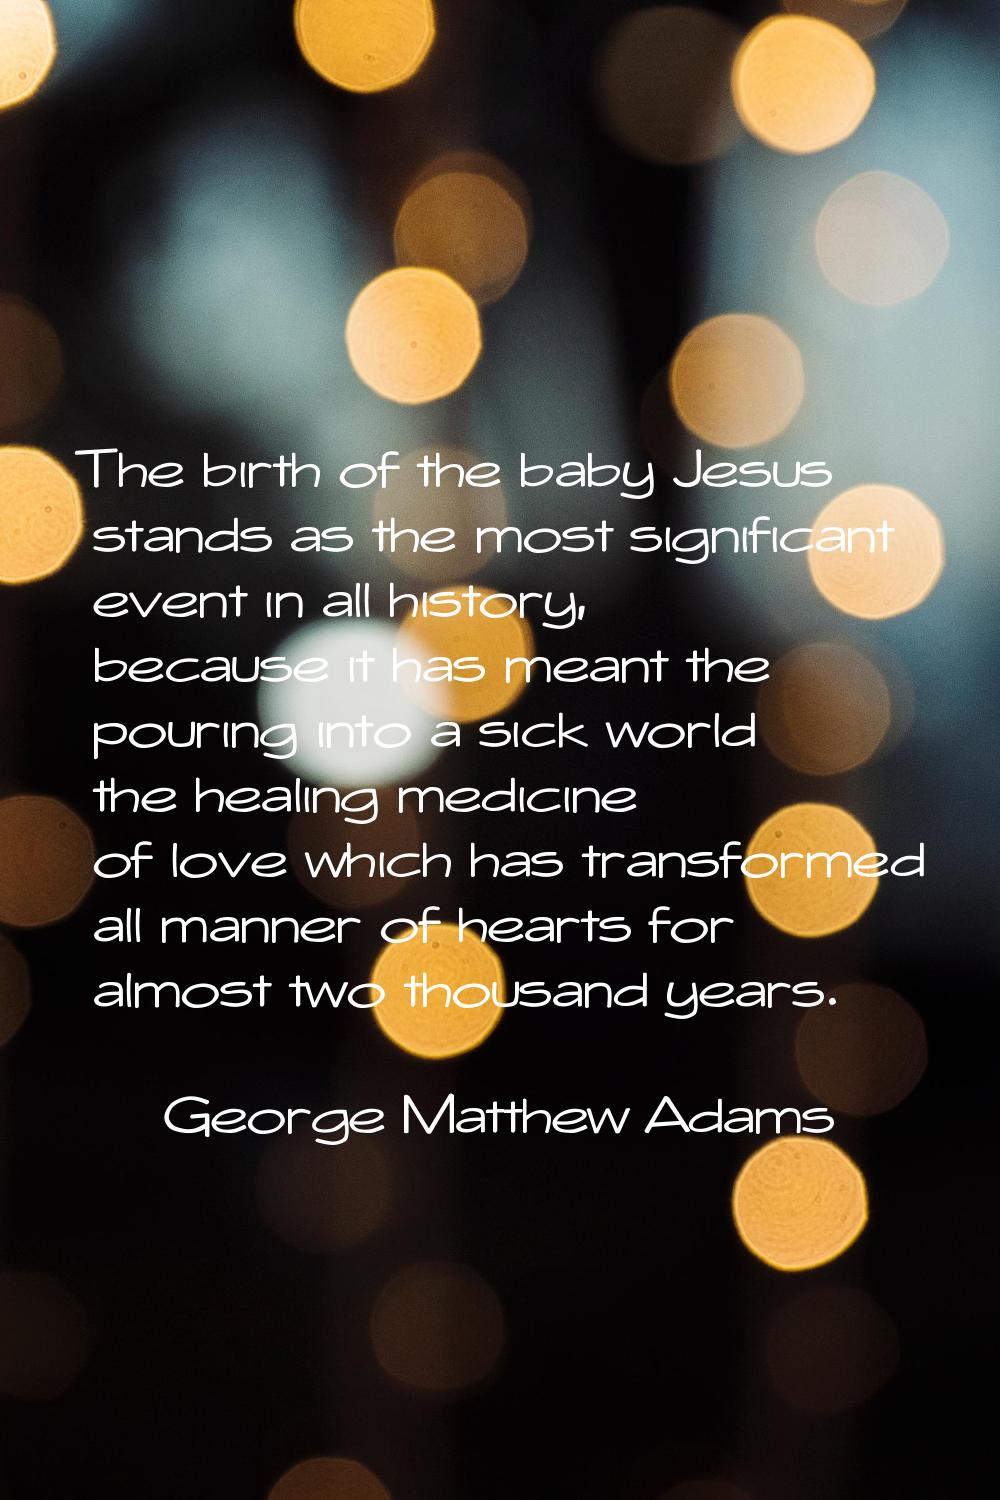 The birth of the baby Jesus stands as the most significant event in all history, because it has mea